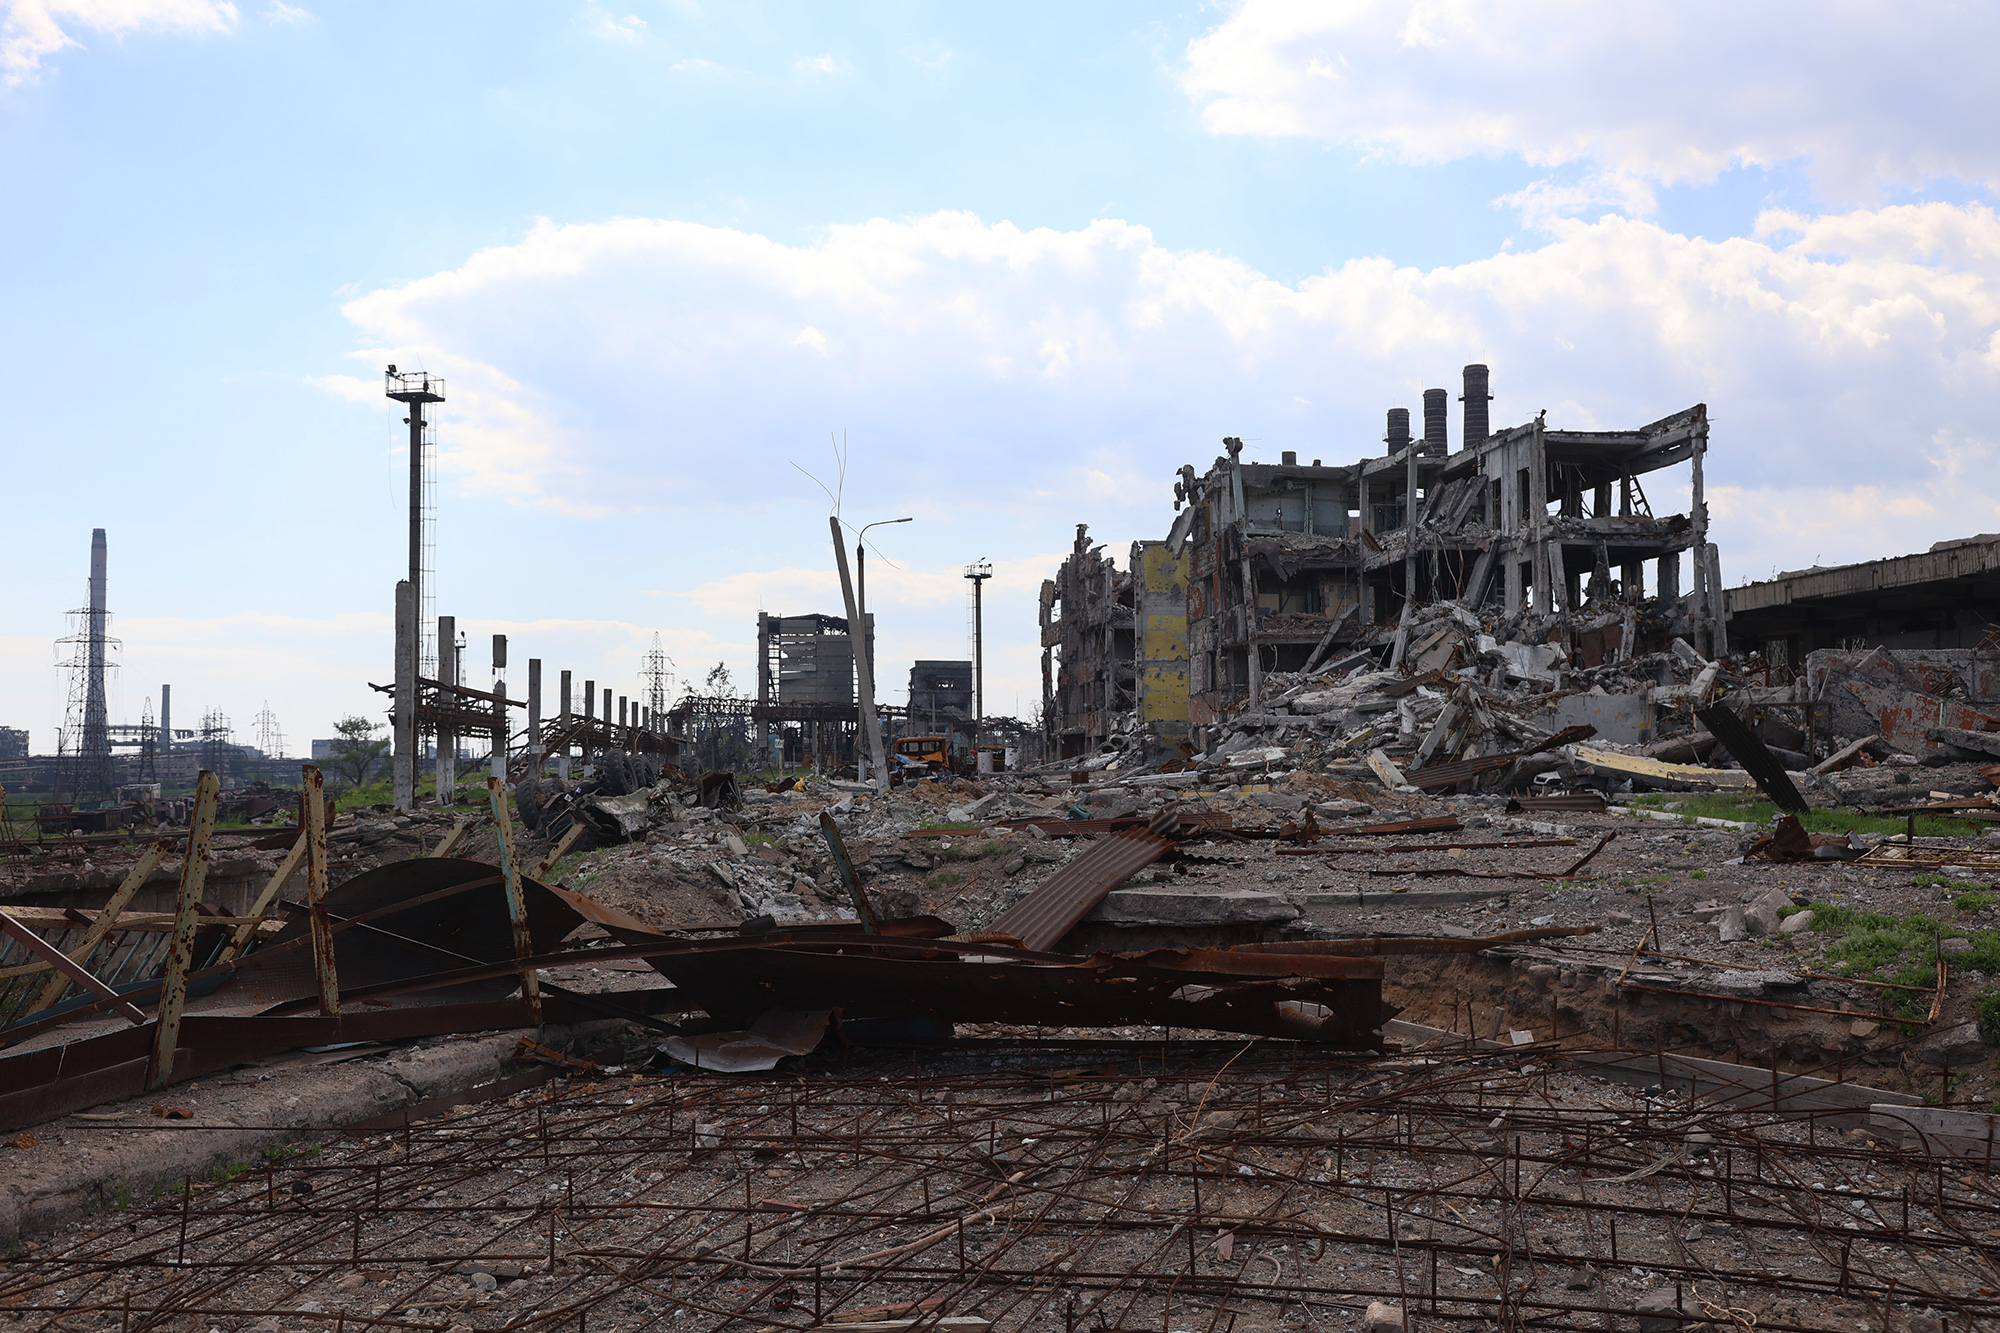 Damage at the Azovstal plant in Mariupol, Ukraine on Friday, May 27.